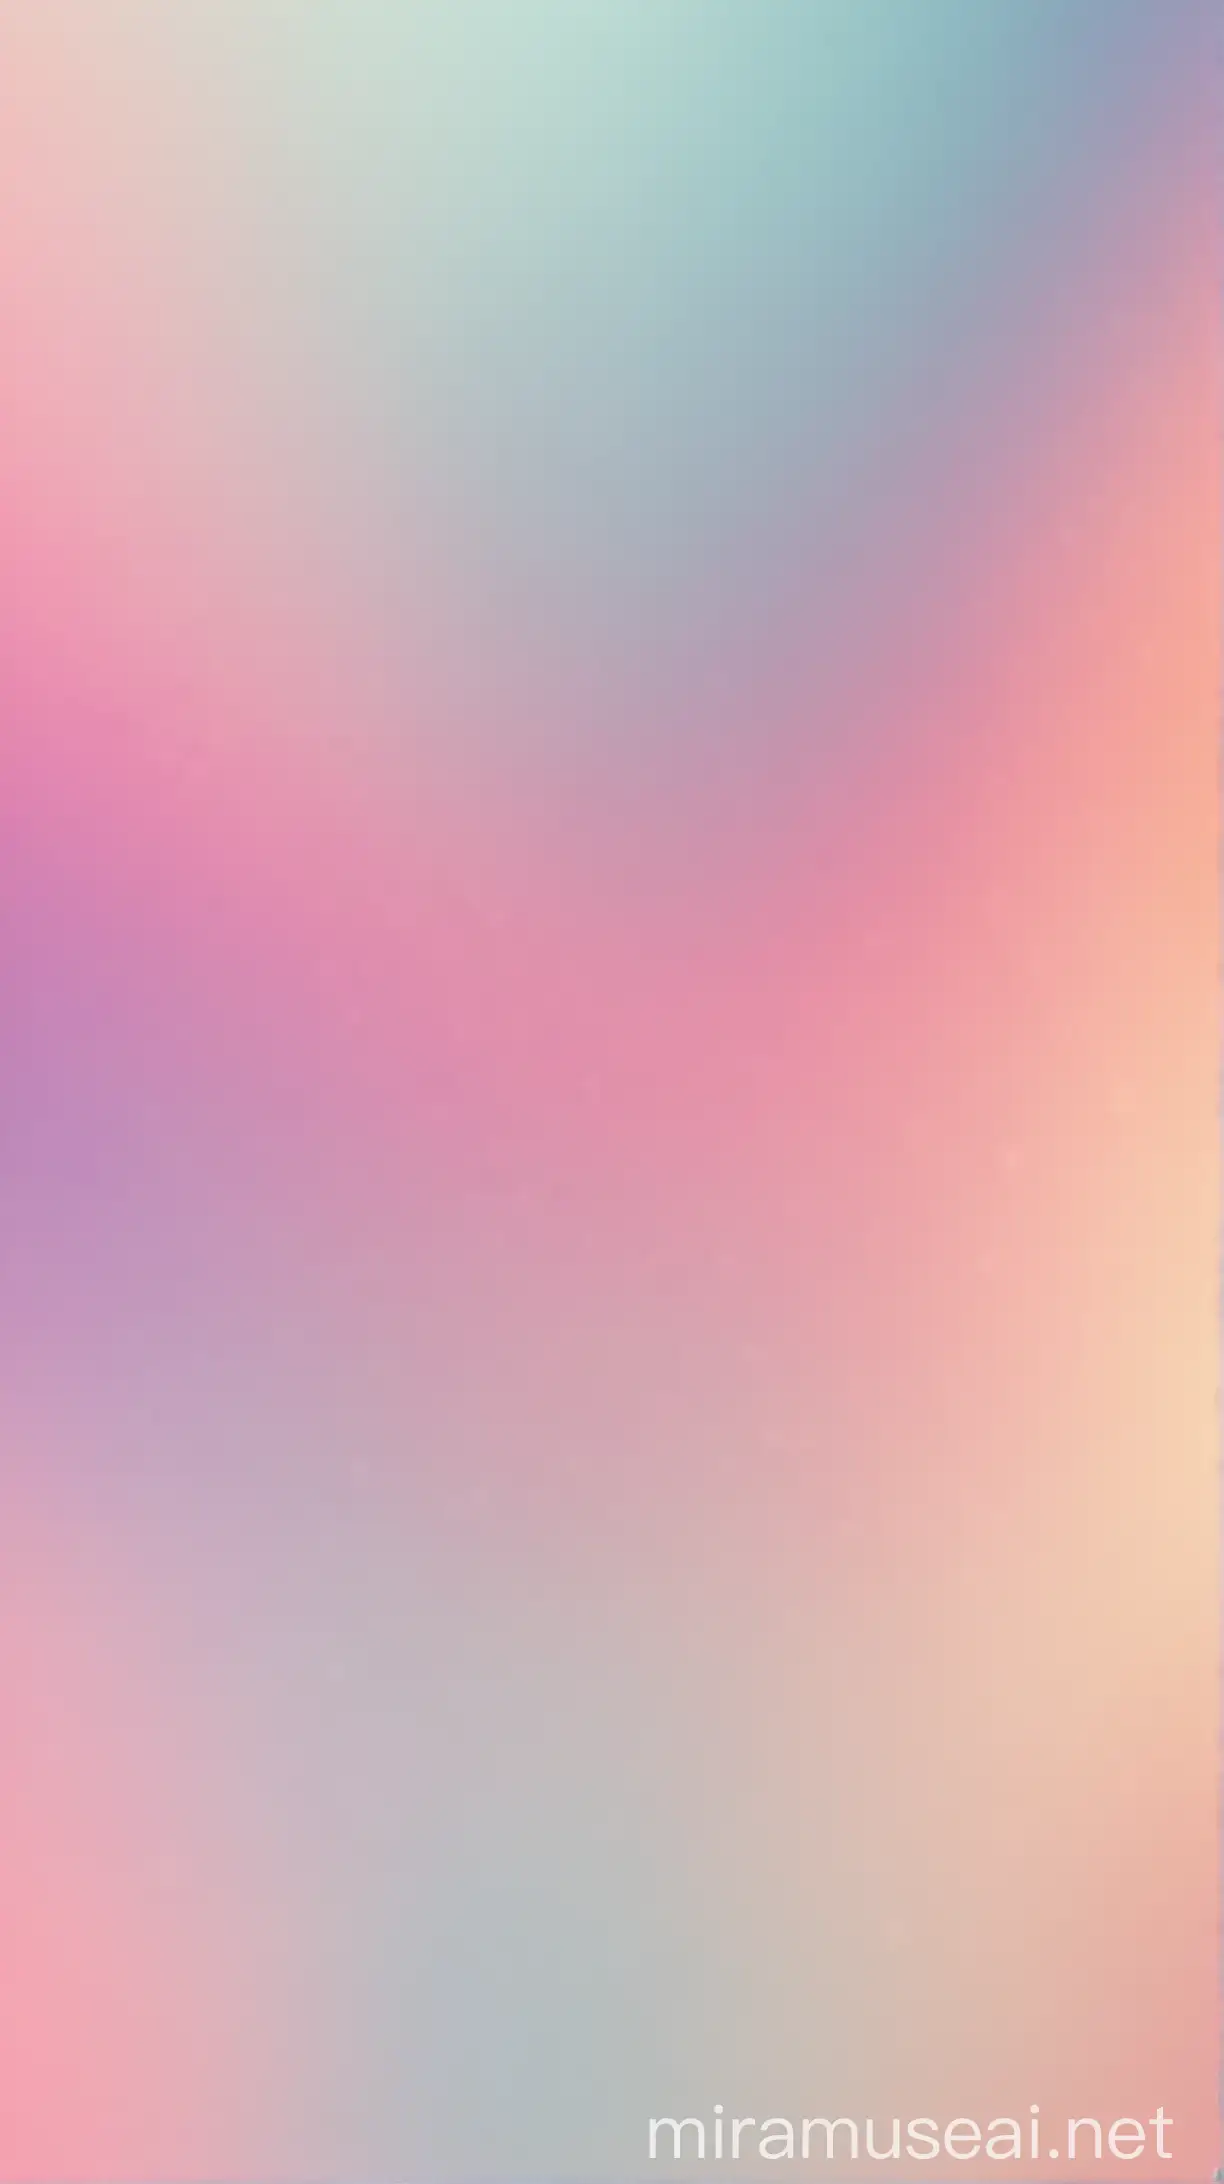 abstract, flowy gradient background with the soft colors f59f8f, f4b9a5, fc684c and ffe0c1